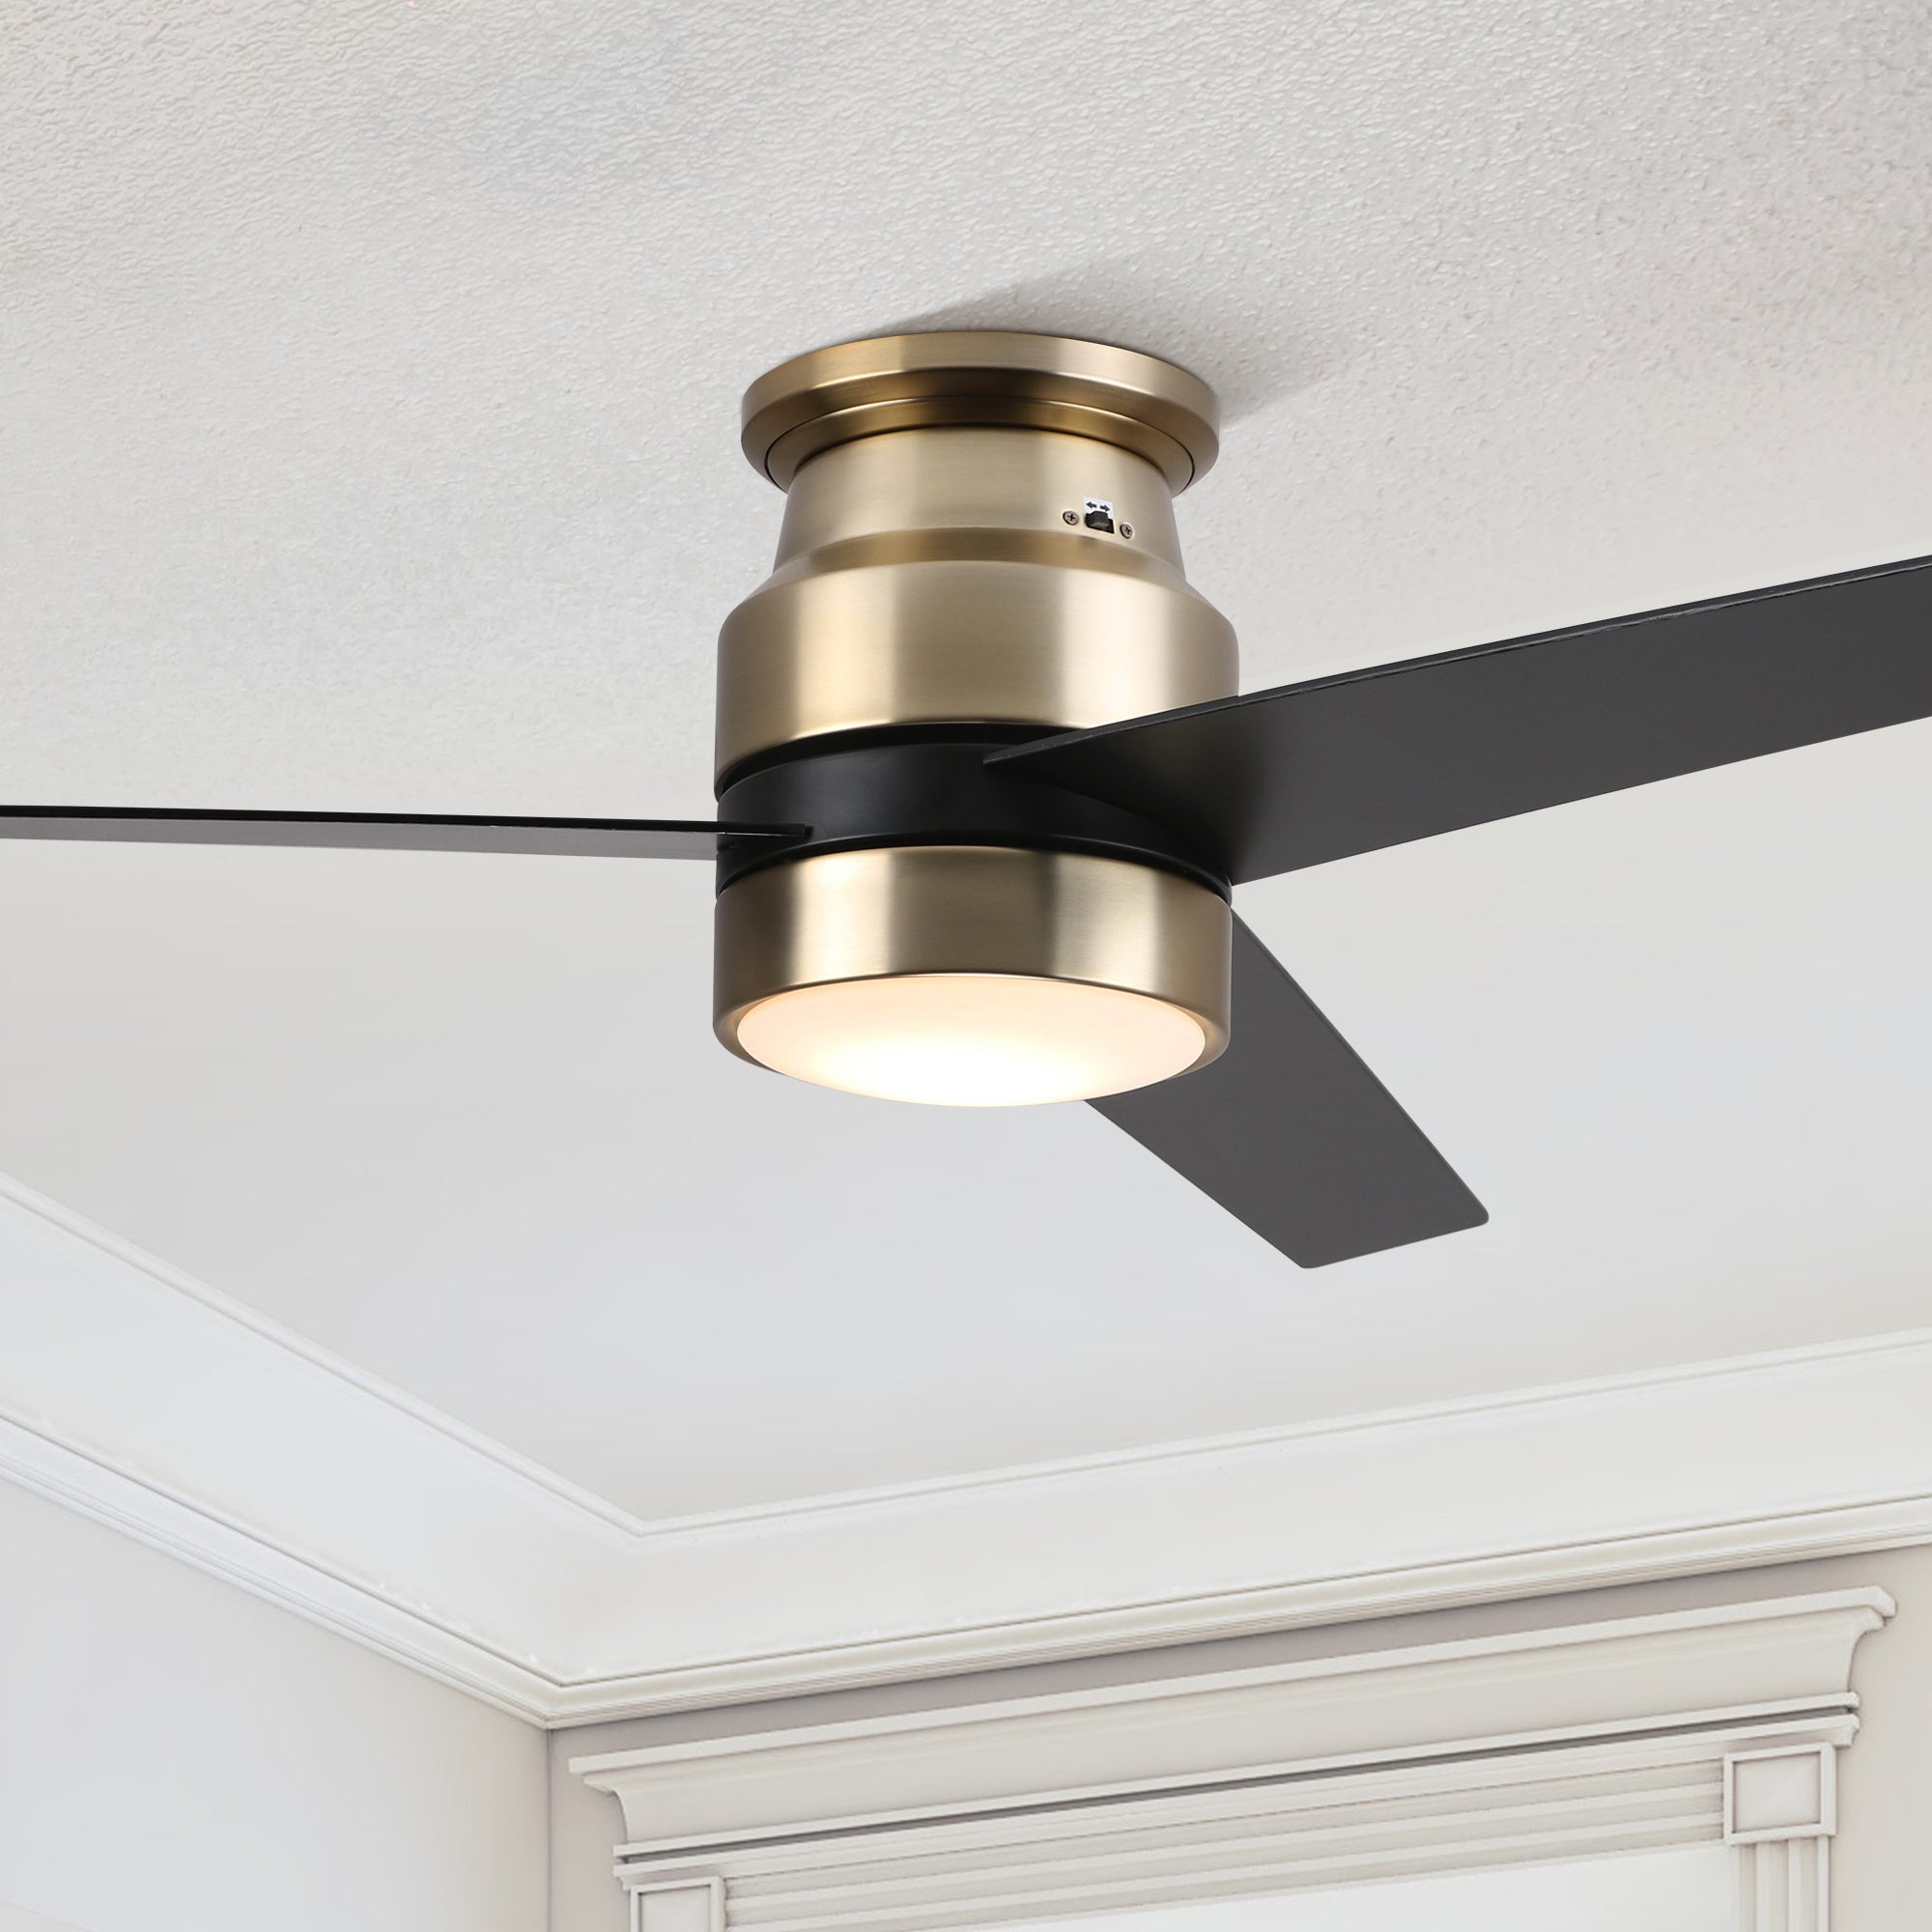 Smafan Ranger smart ceiling fan with energy-efficient LED light kit has 3000 lumens and lasts over 50000+ hours. 